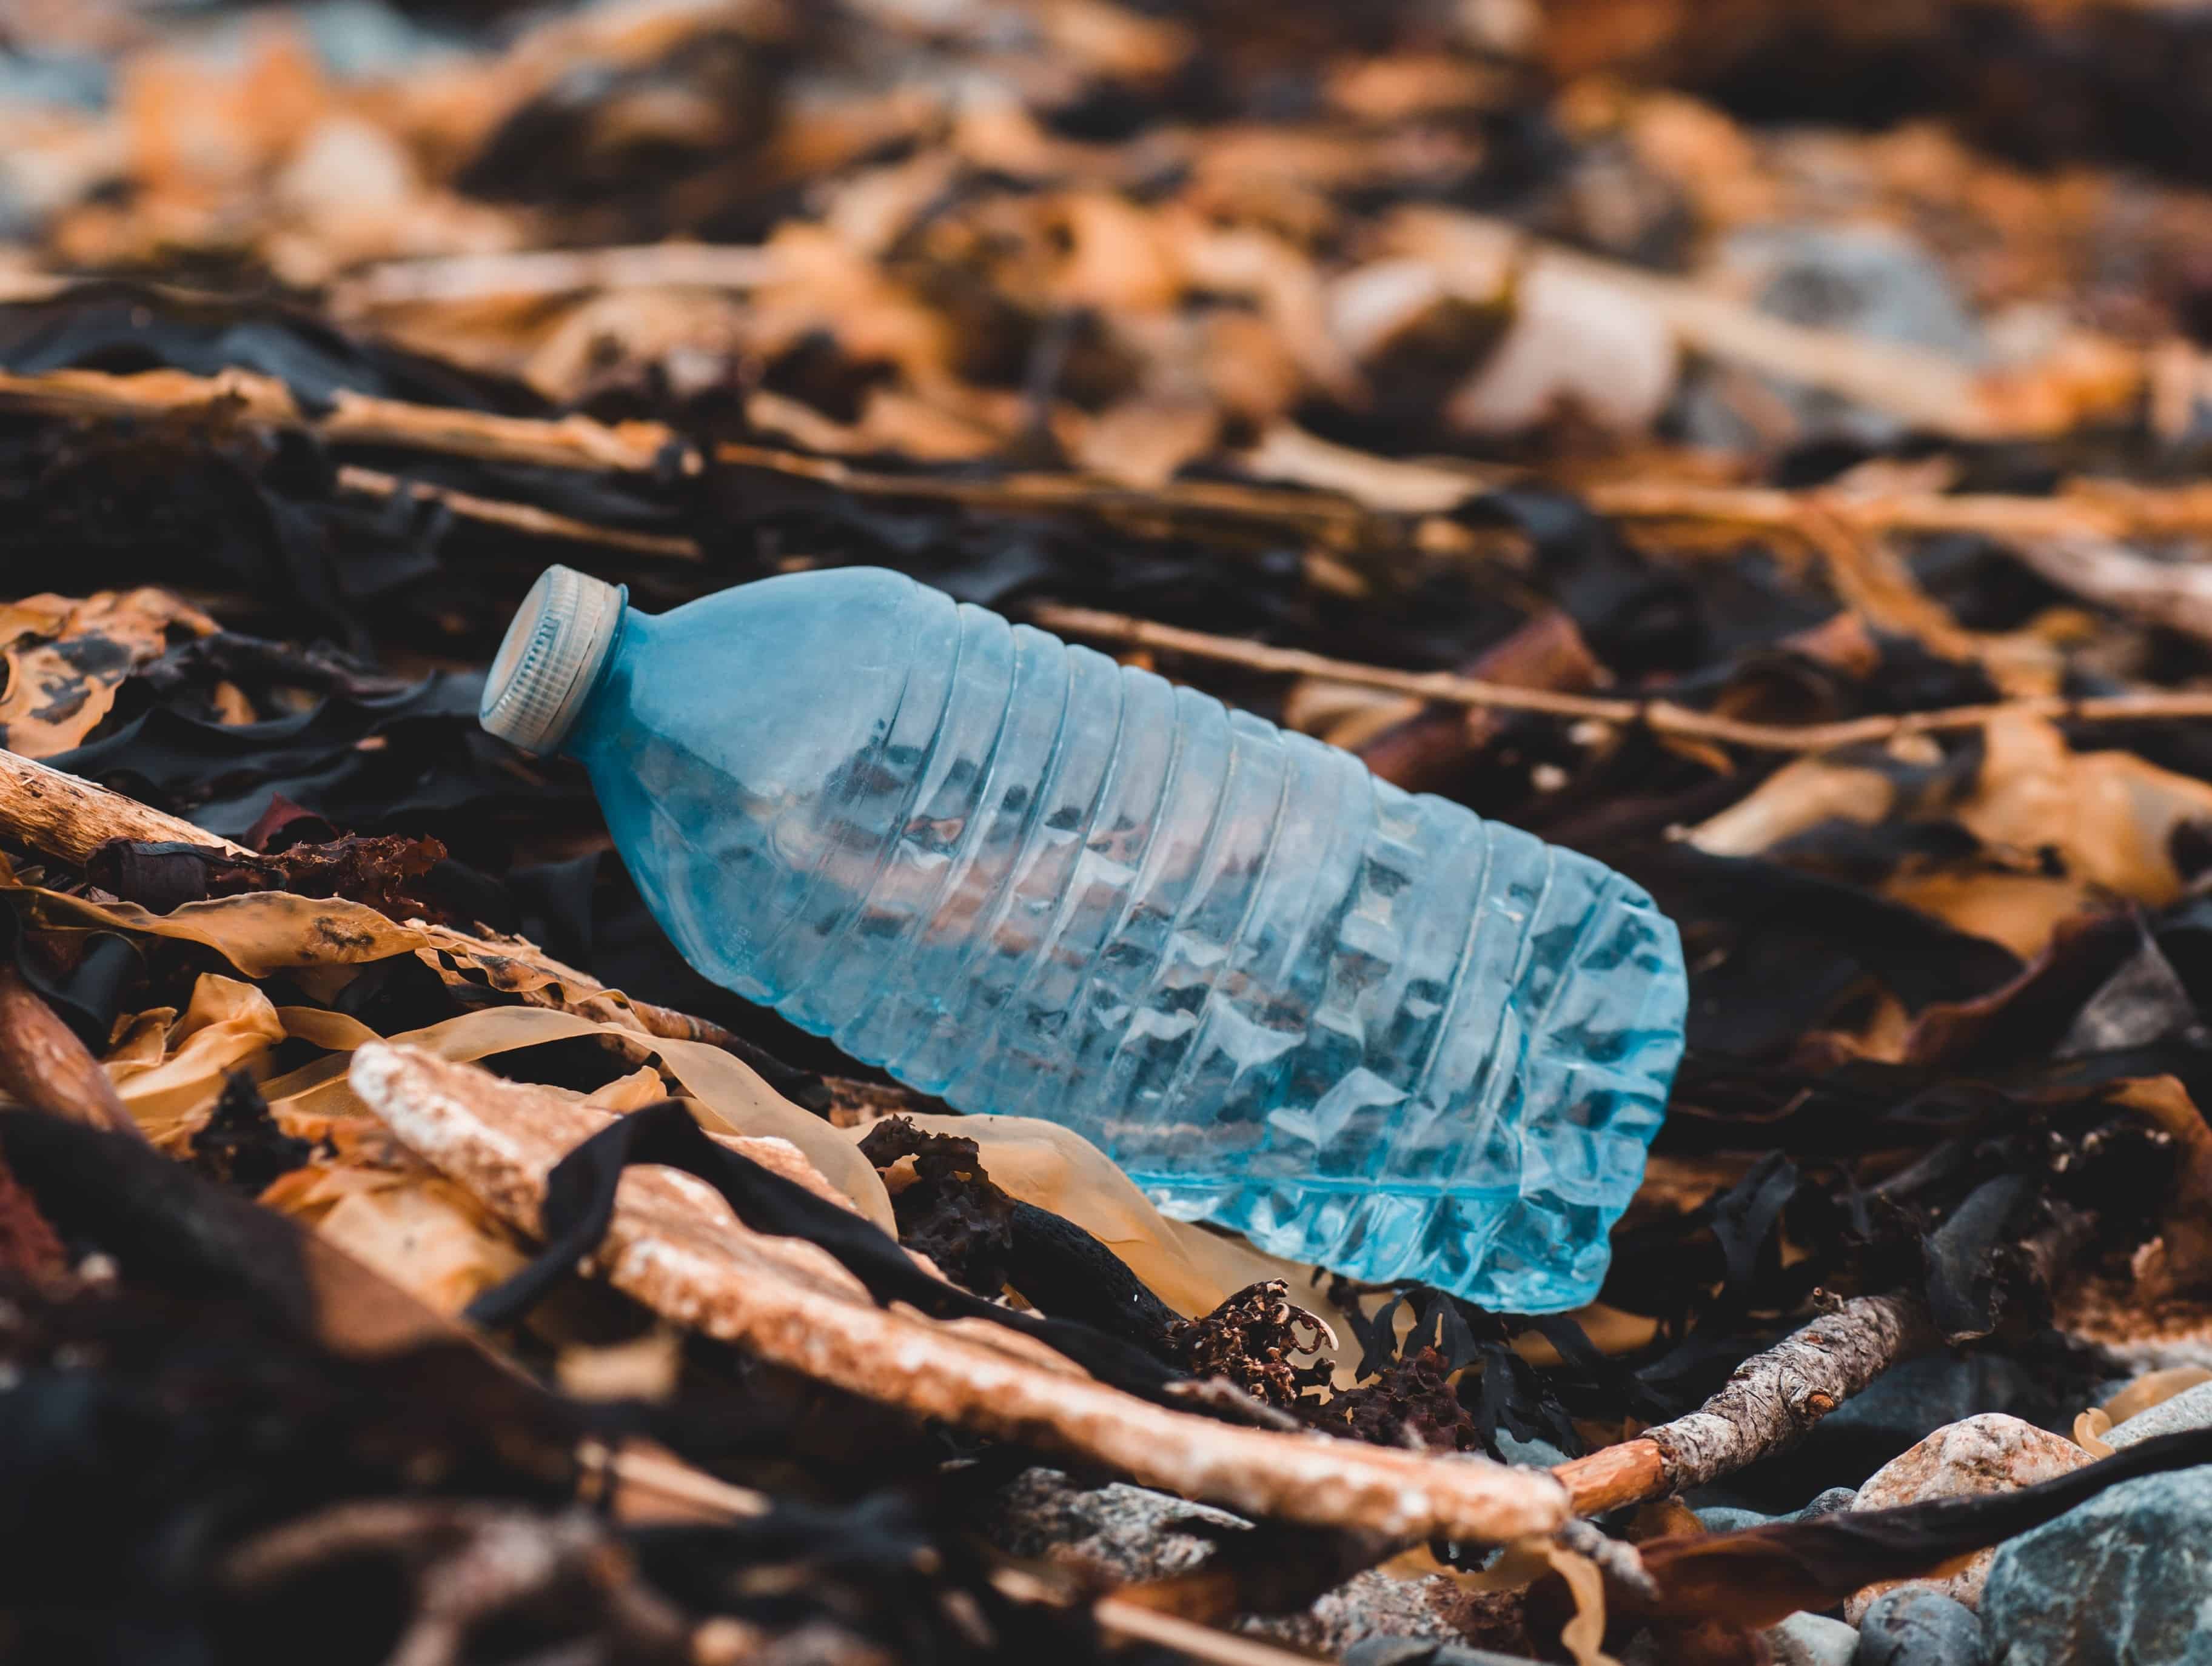 A completely sustainable plastics economy is feasible, research says